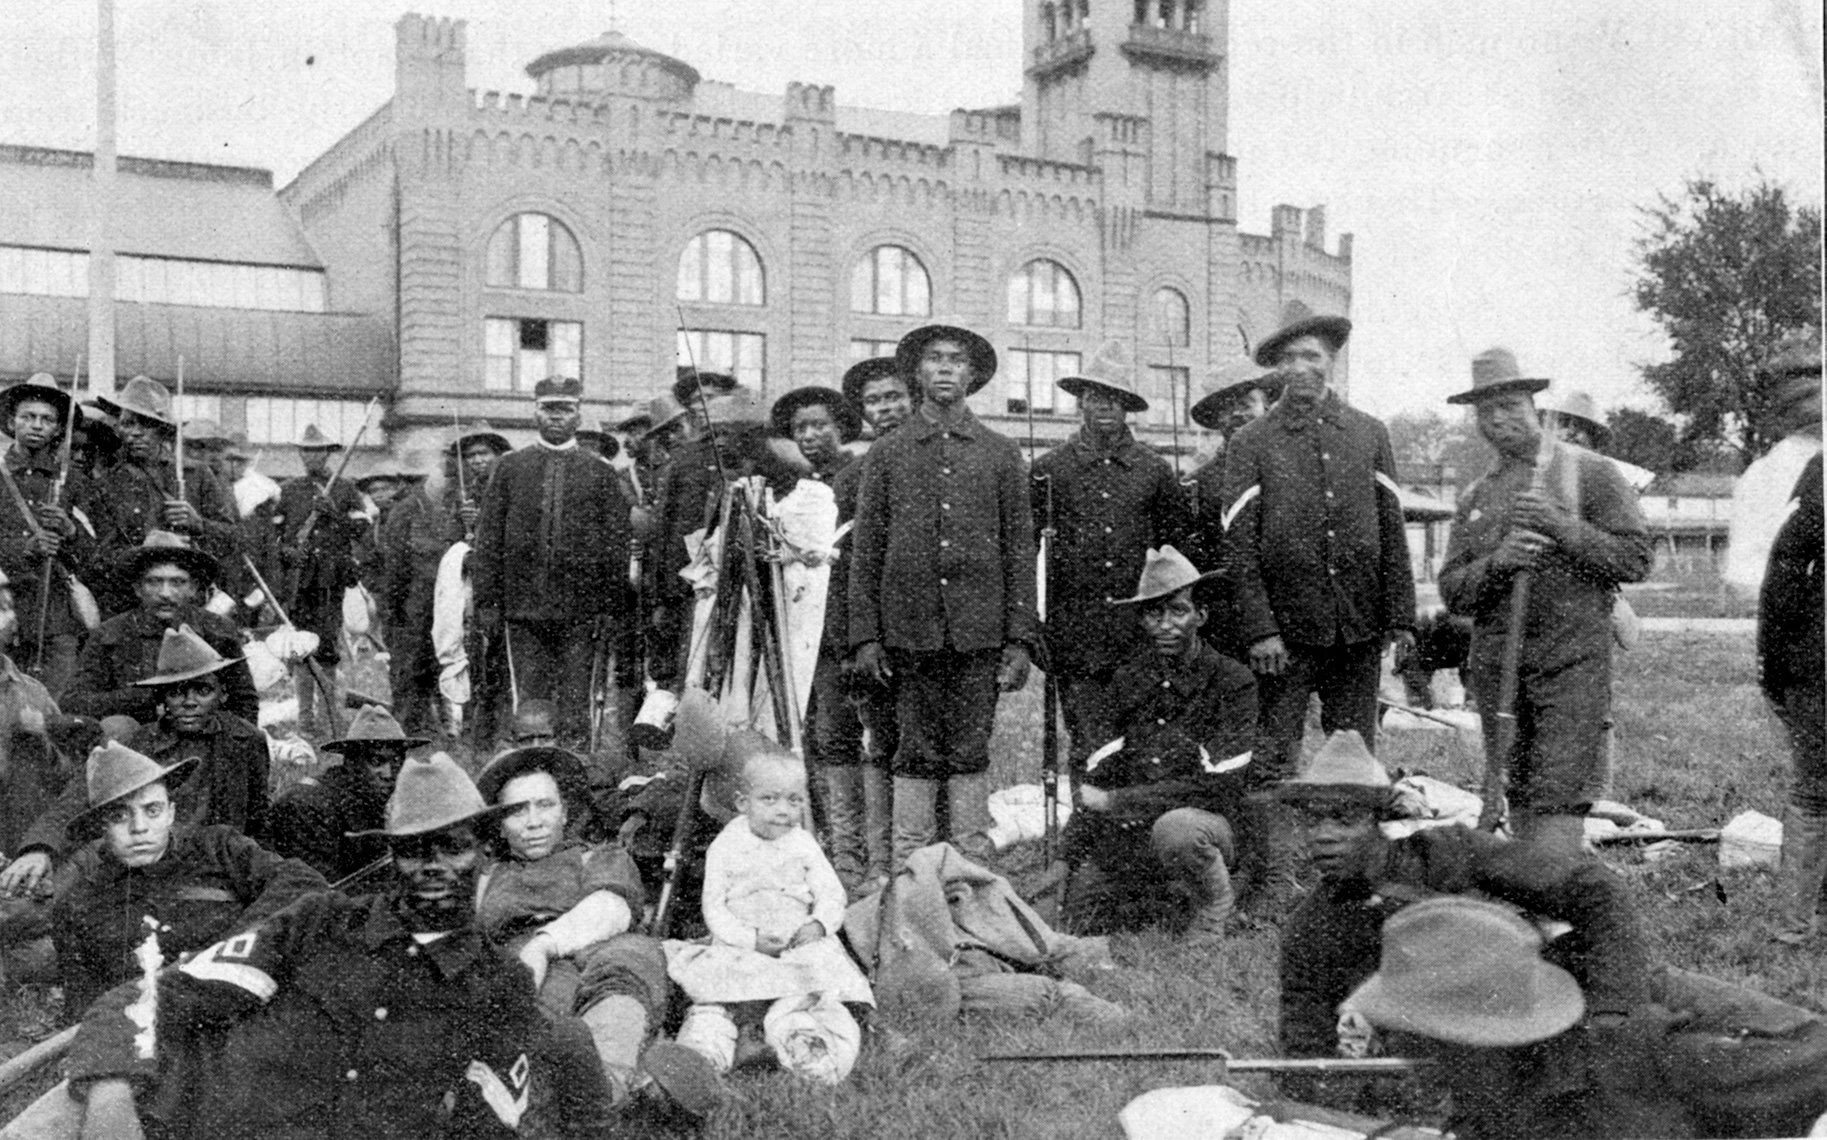 Approximately 30 Black men in hats and uniform, standing, sitting, and laying outside holding guns.